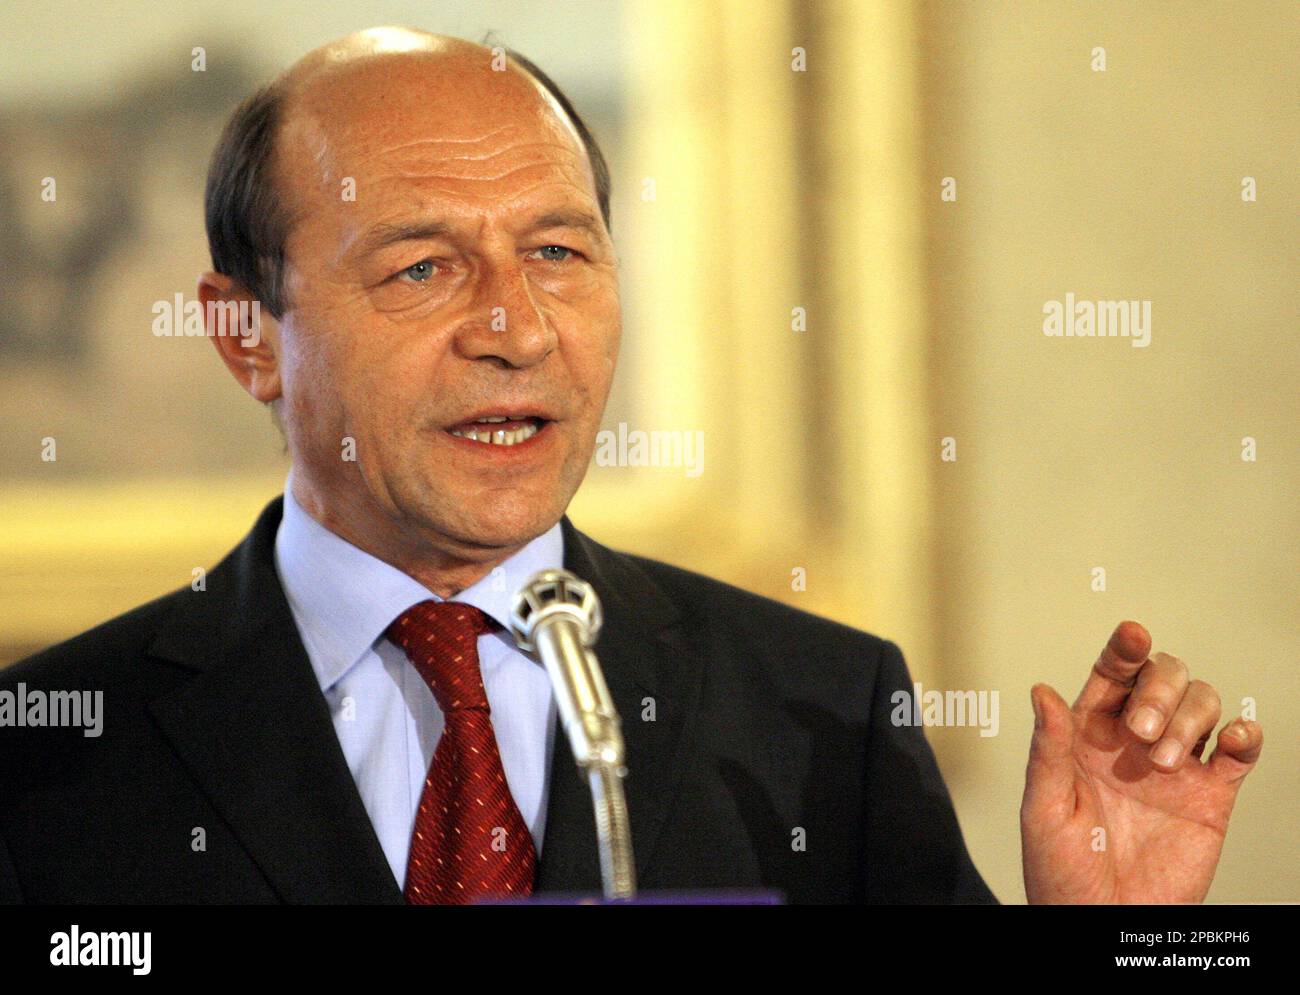 Romania's suspended President Traian Basescu delivers a statement in Bucharest, Romania Friday April 20, 2007. Basescu said Friday he would not resign, a day after he was suspended by Romania's parliament pending an impeachment referendum amid opposition allegations that he abused his position. (AP Photo/Vadim Ghirda) Stock Photo